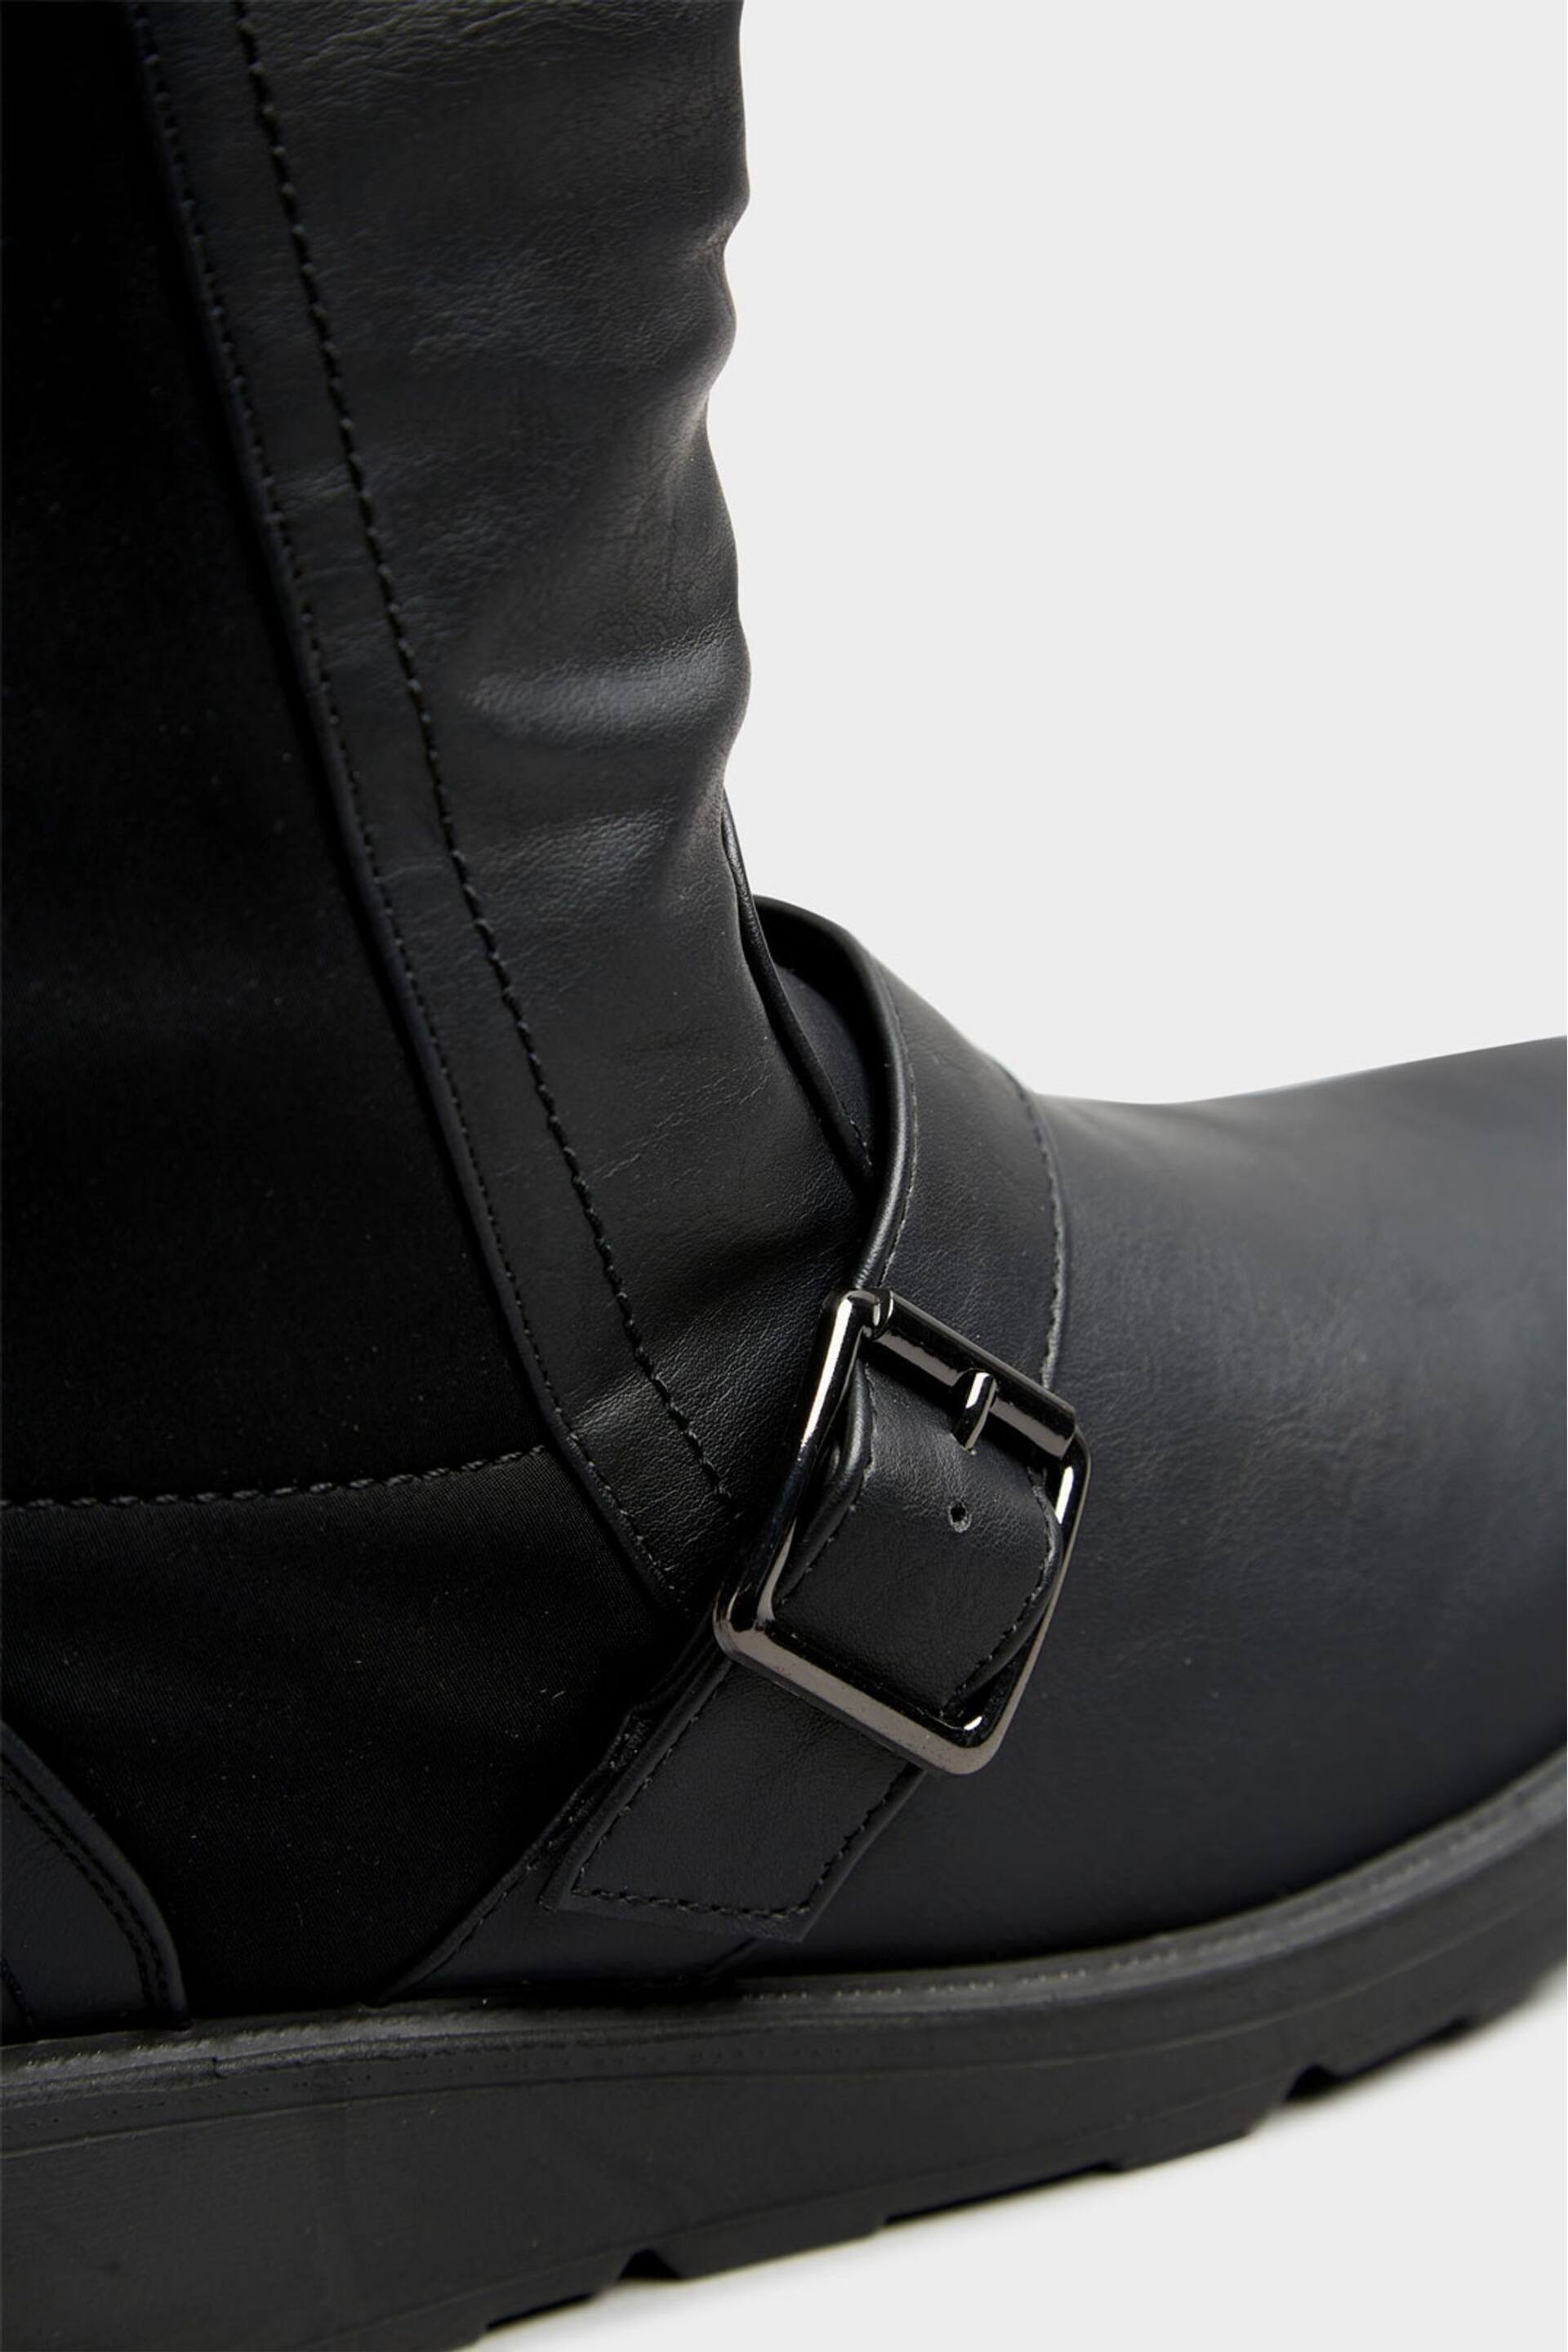 Yours Curve Black Wide Fit Low Wedge Buckle Boots - Image 4 of 5